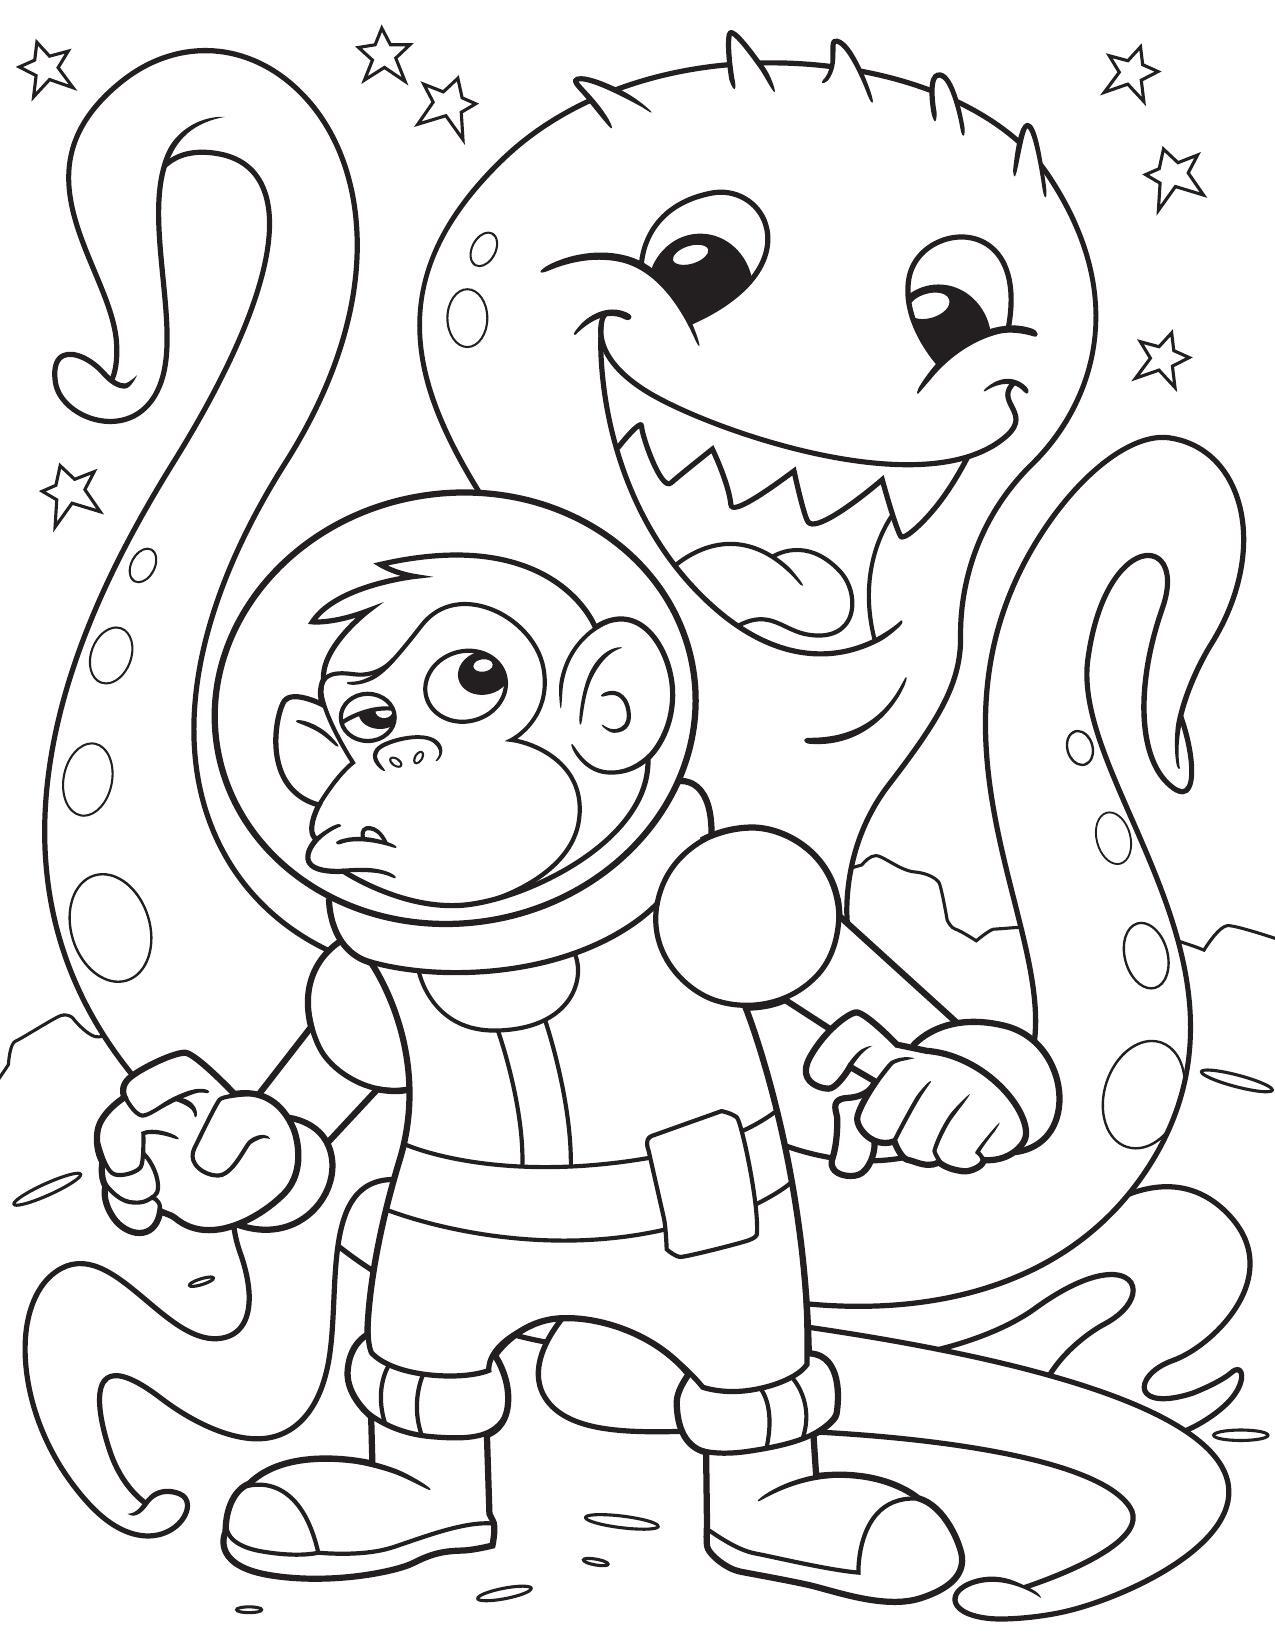 Space Chimp and Friend